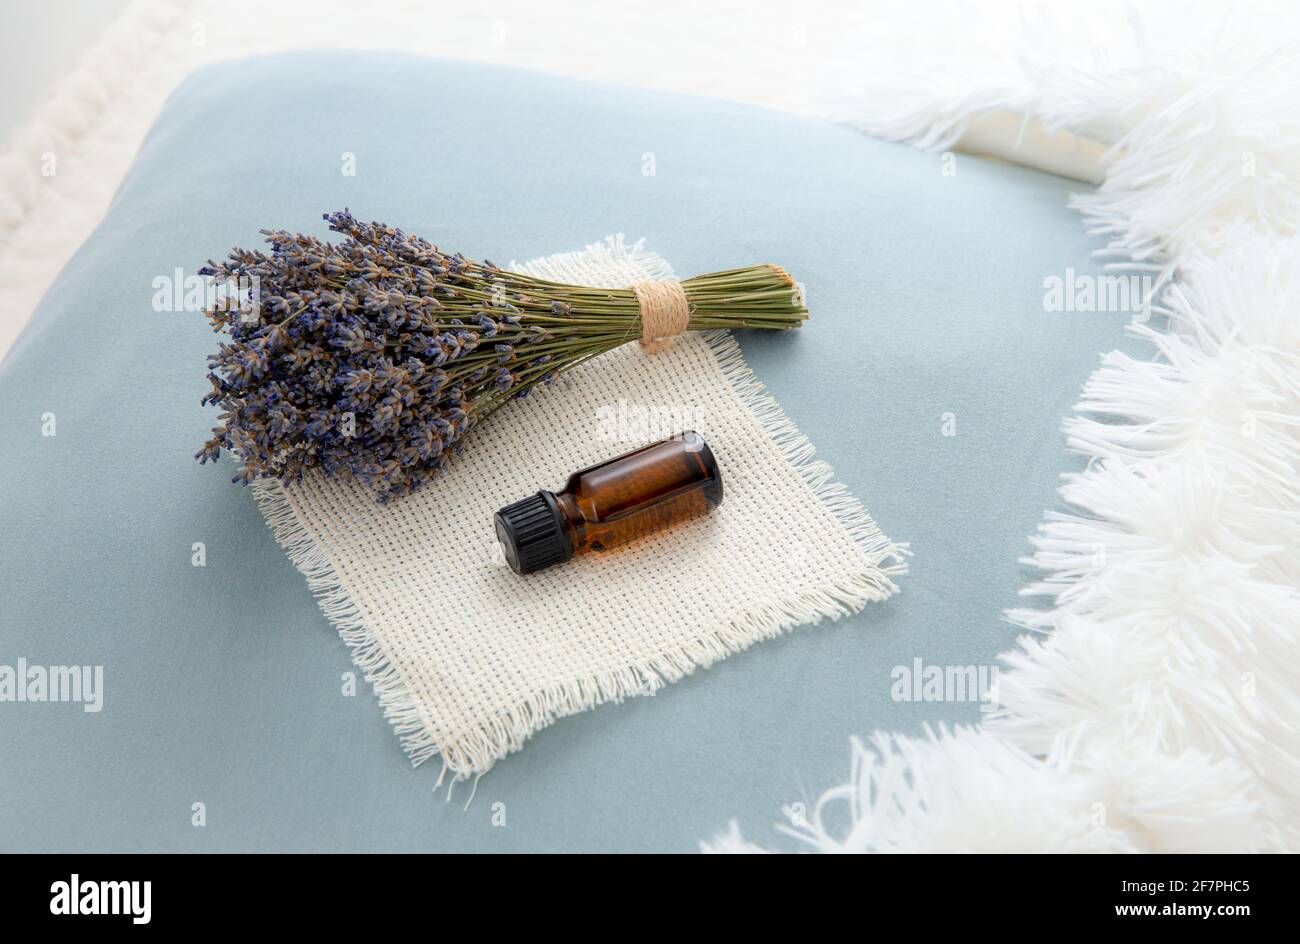 Using lavender flower essential oil for better good night sleep. Aromatherapy concept. Lavender oil and bouquet of dried lavender flowers on pillow. Stock Photo